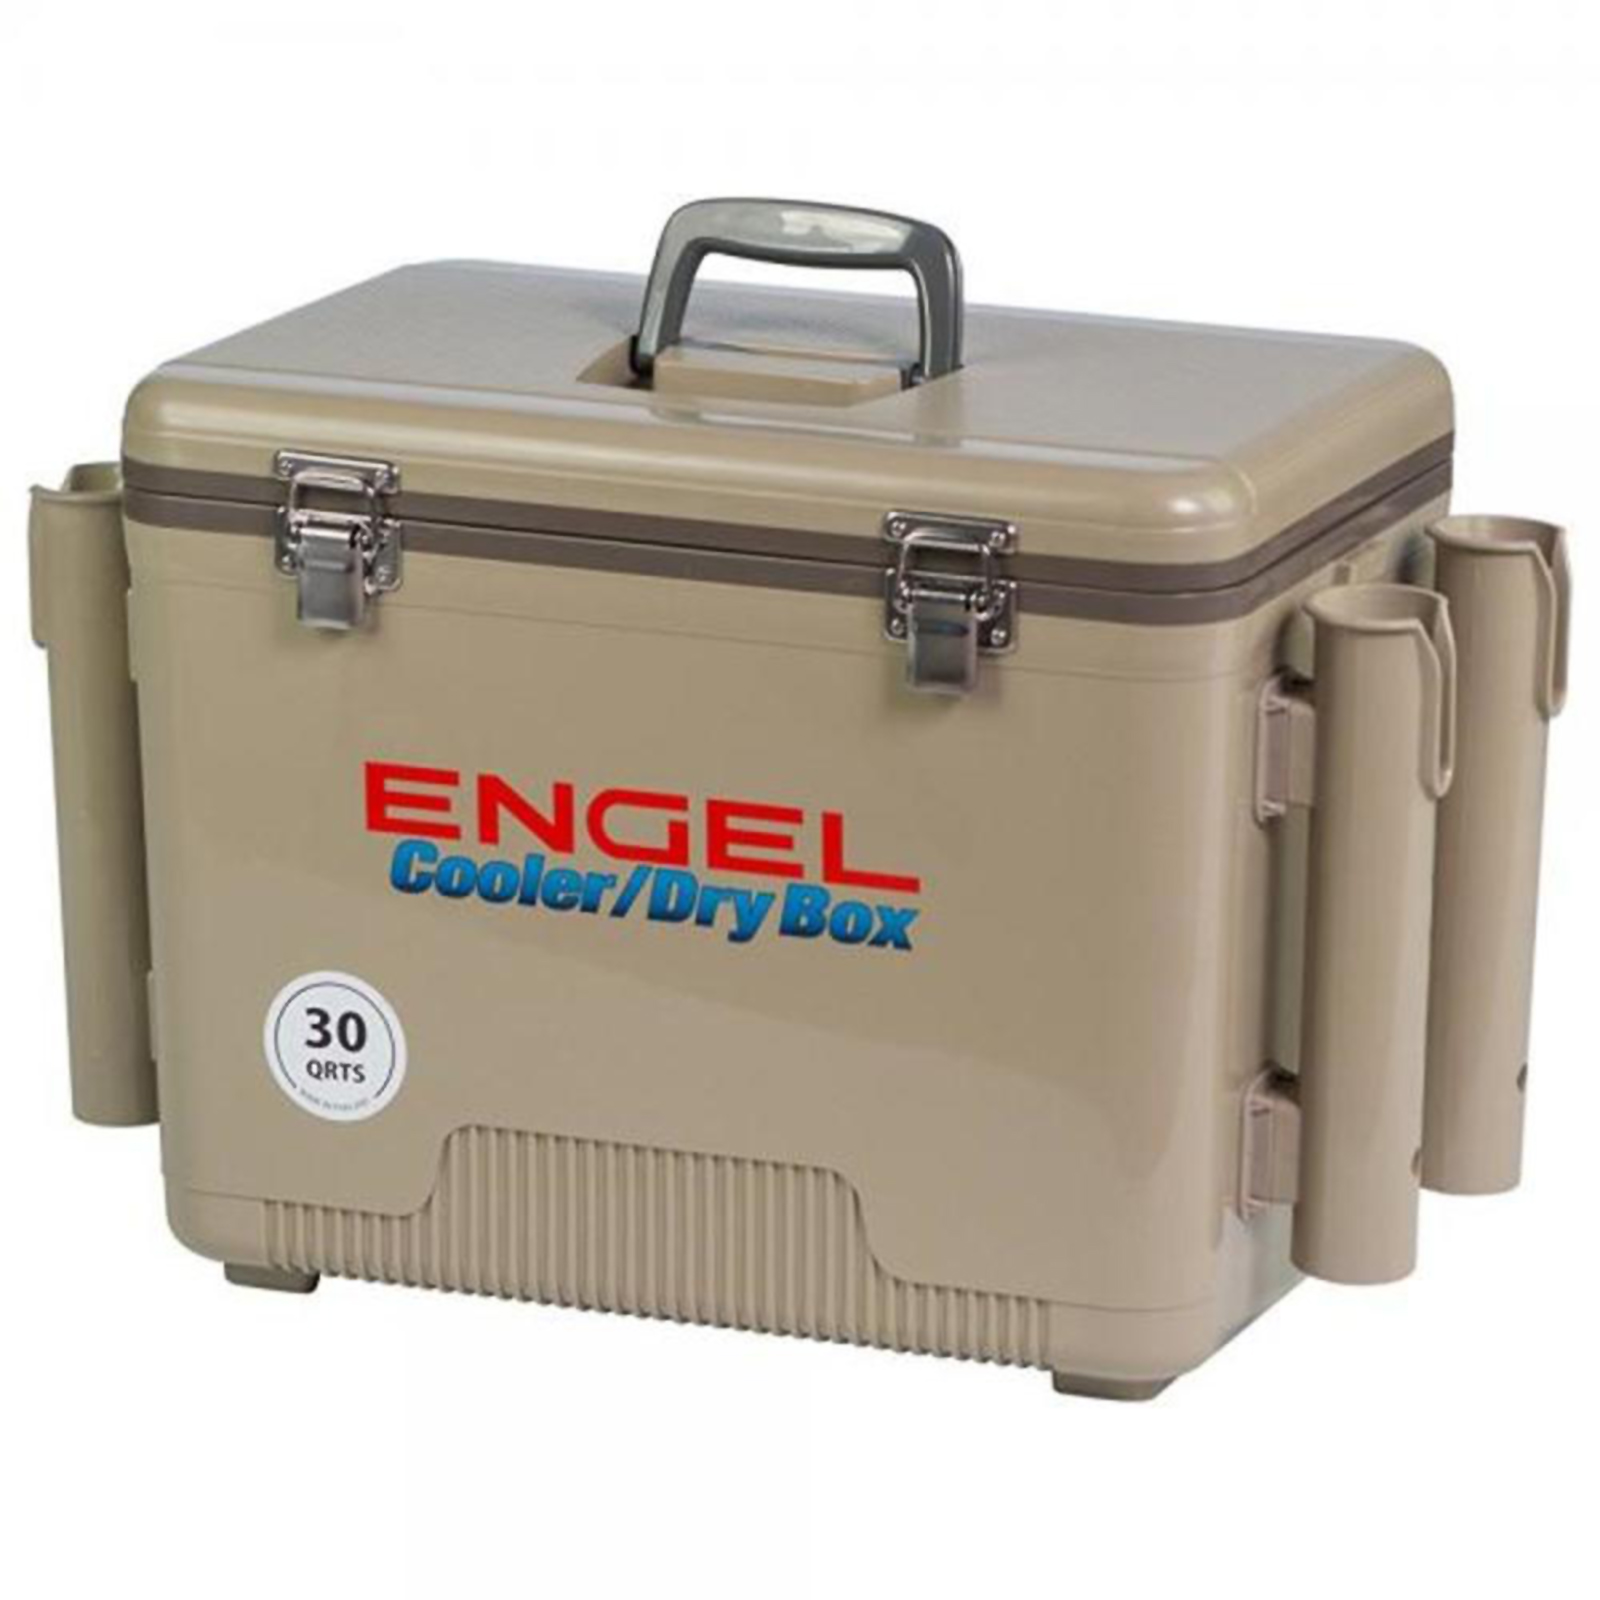 Engel 30qt. Cooler Chest with 4 Removable Holders - Tan